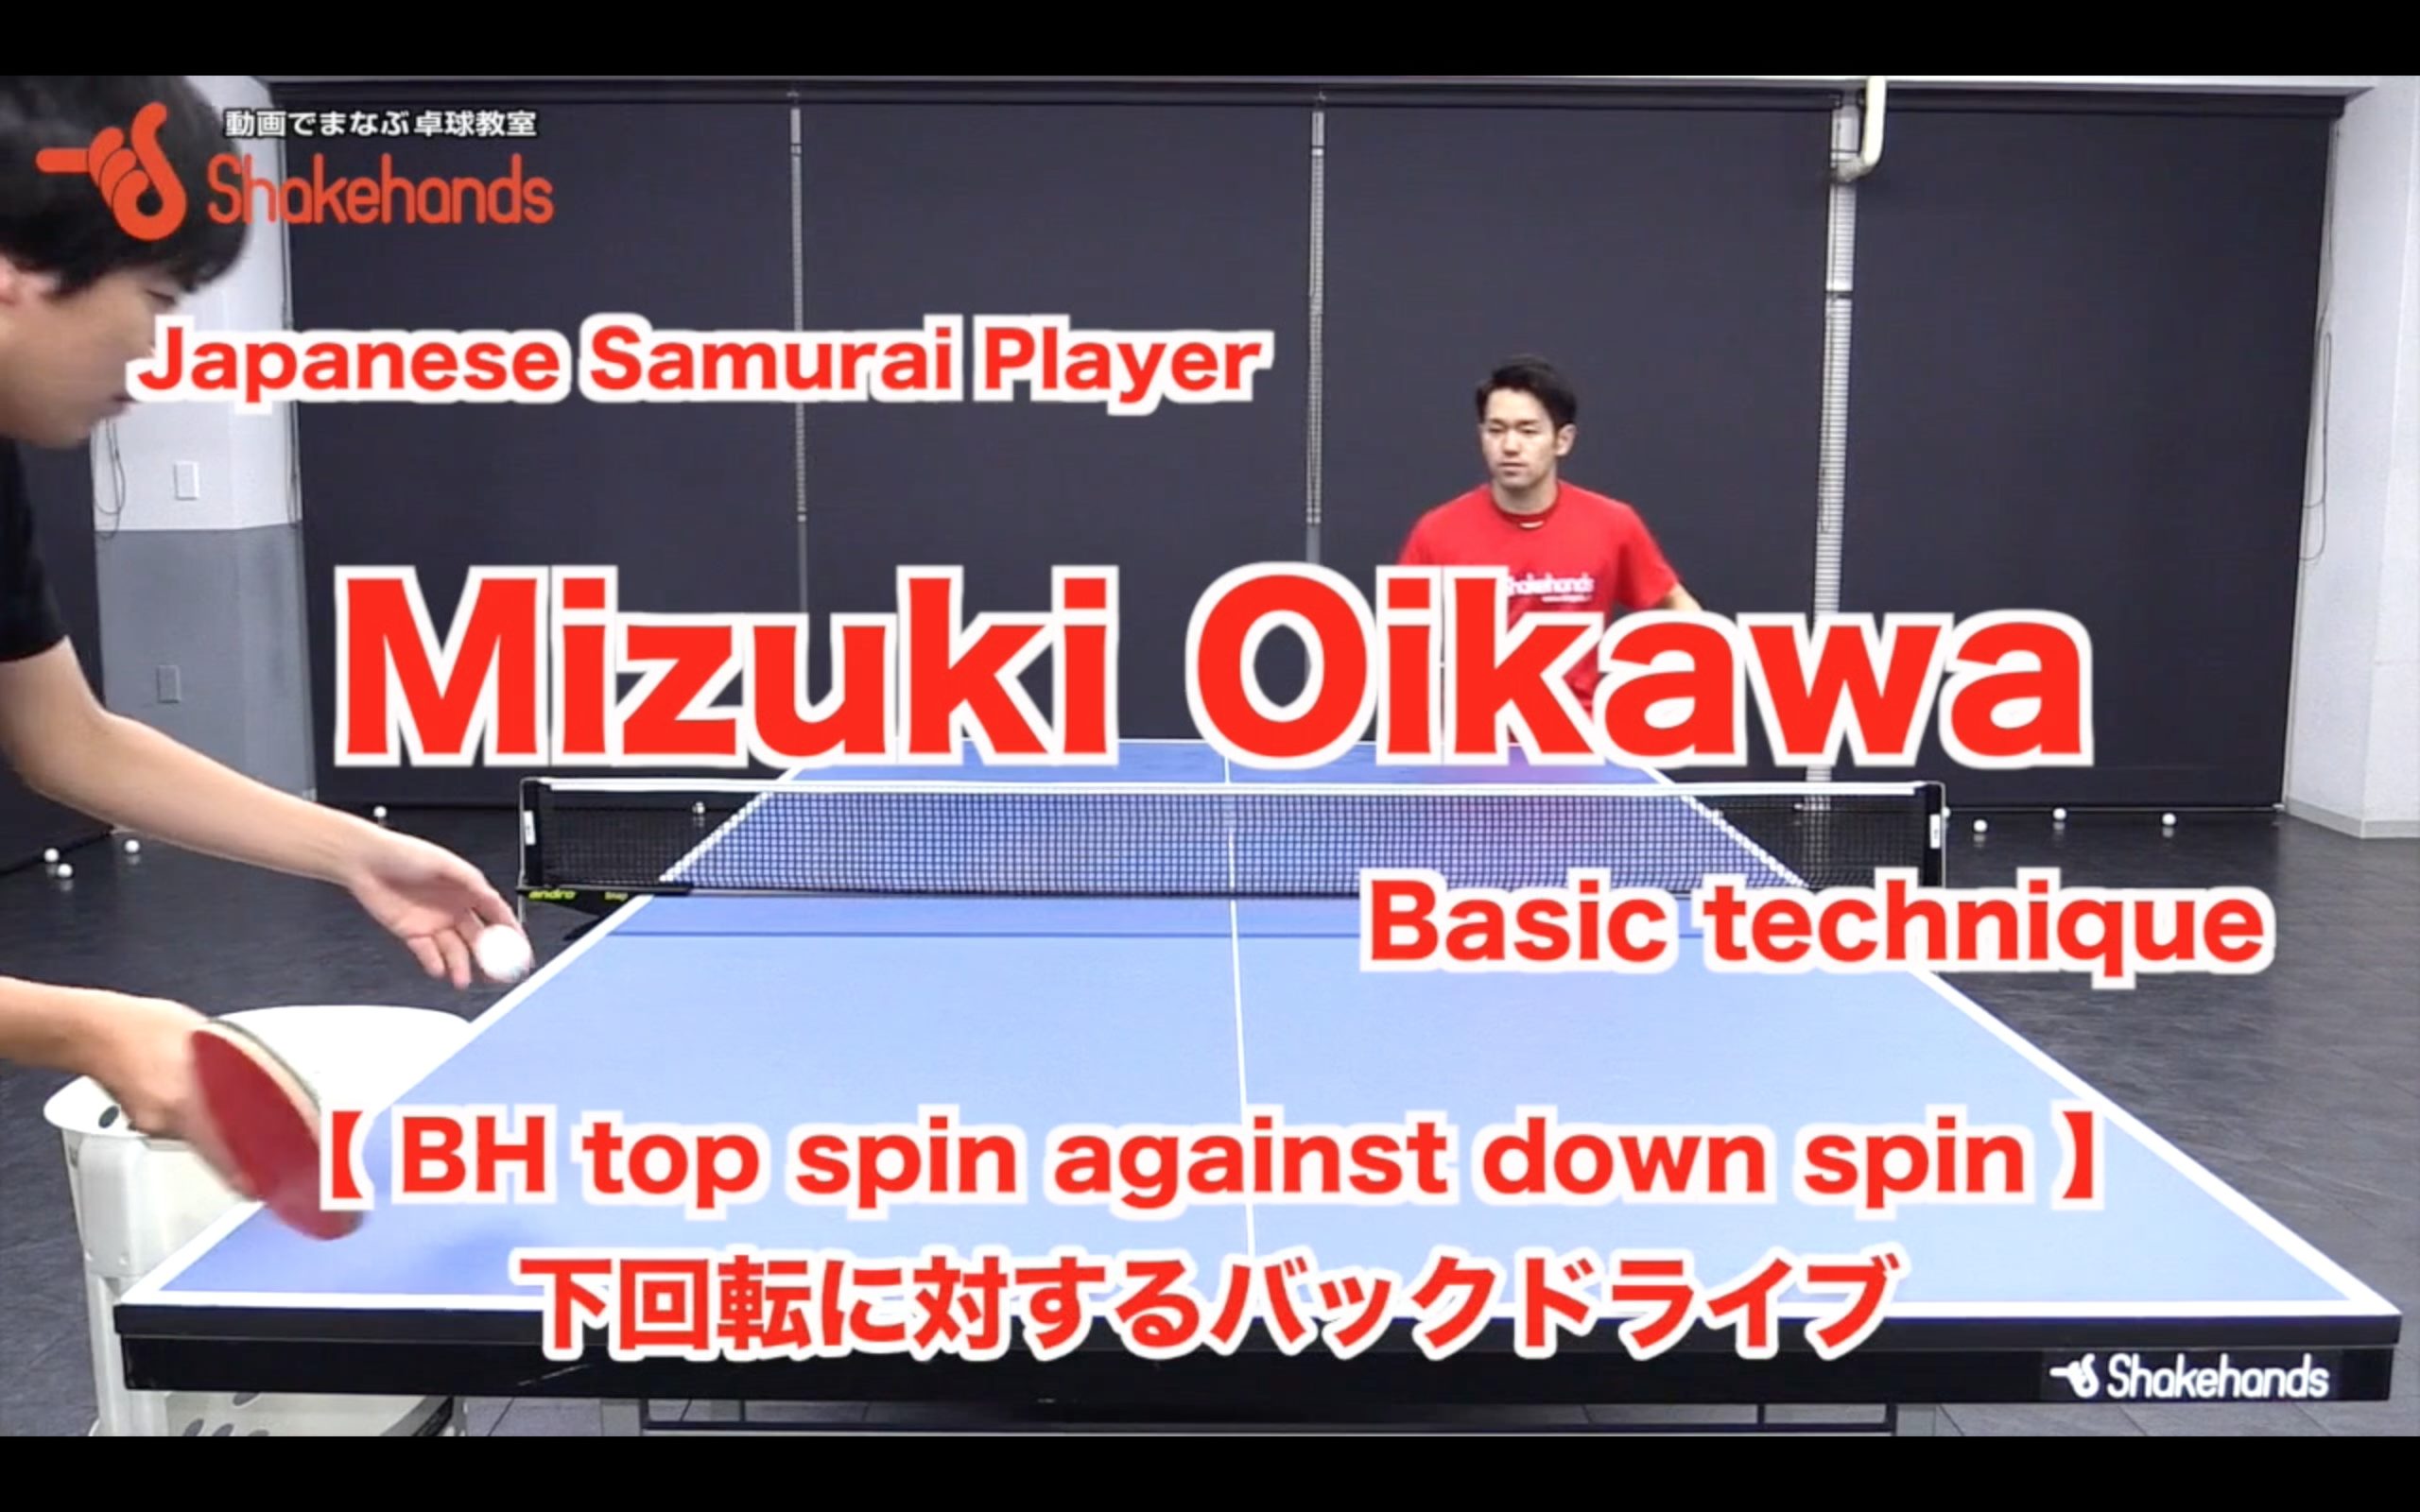 How to make power BH topspin against down spin